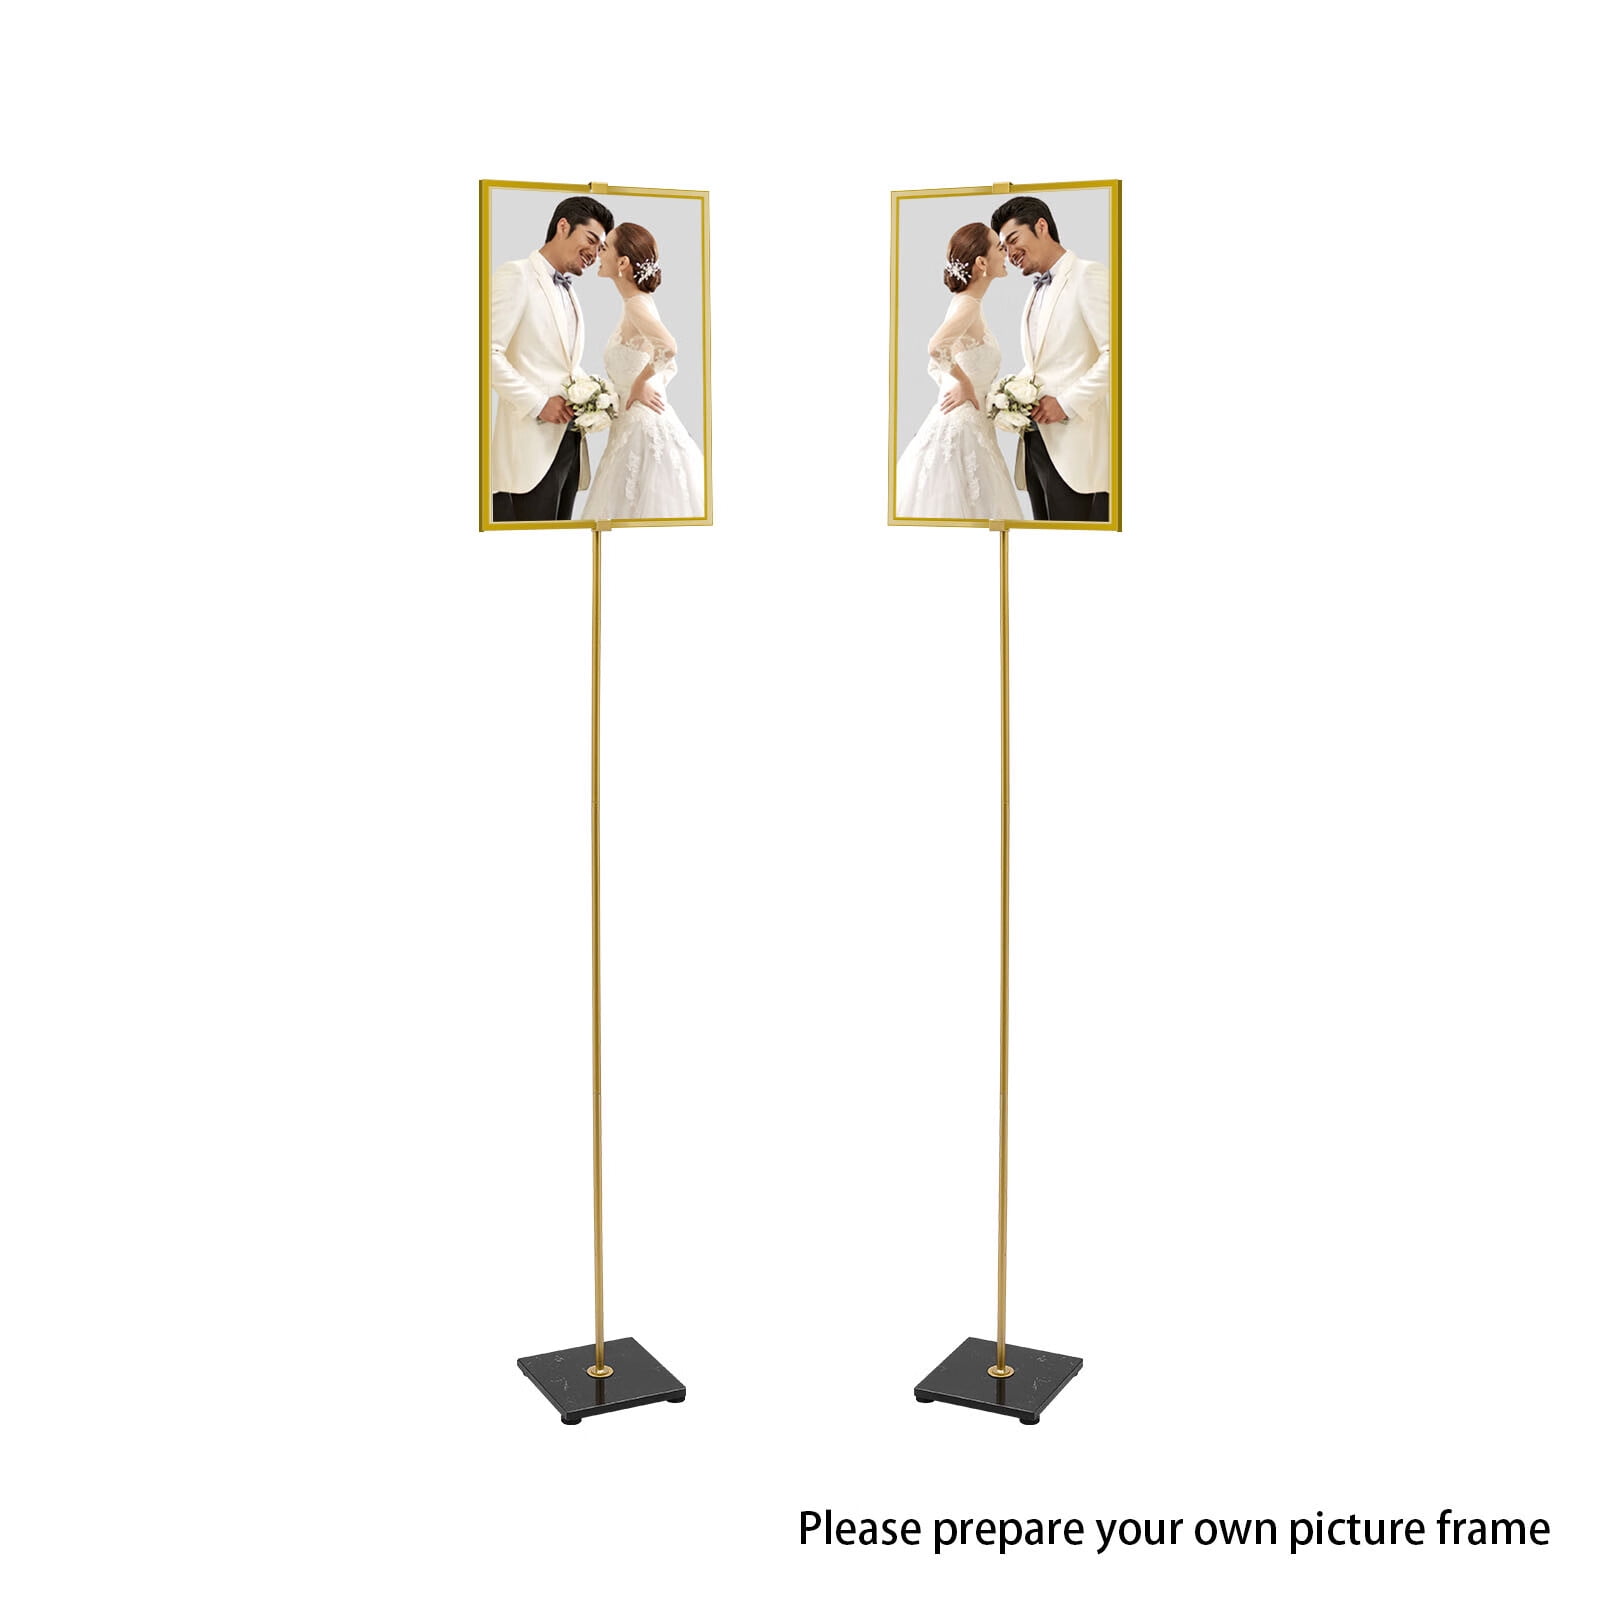 2 Florentine picture Easel Gold Wood Display Stands 14 1/2 and 6 3/4